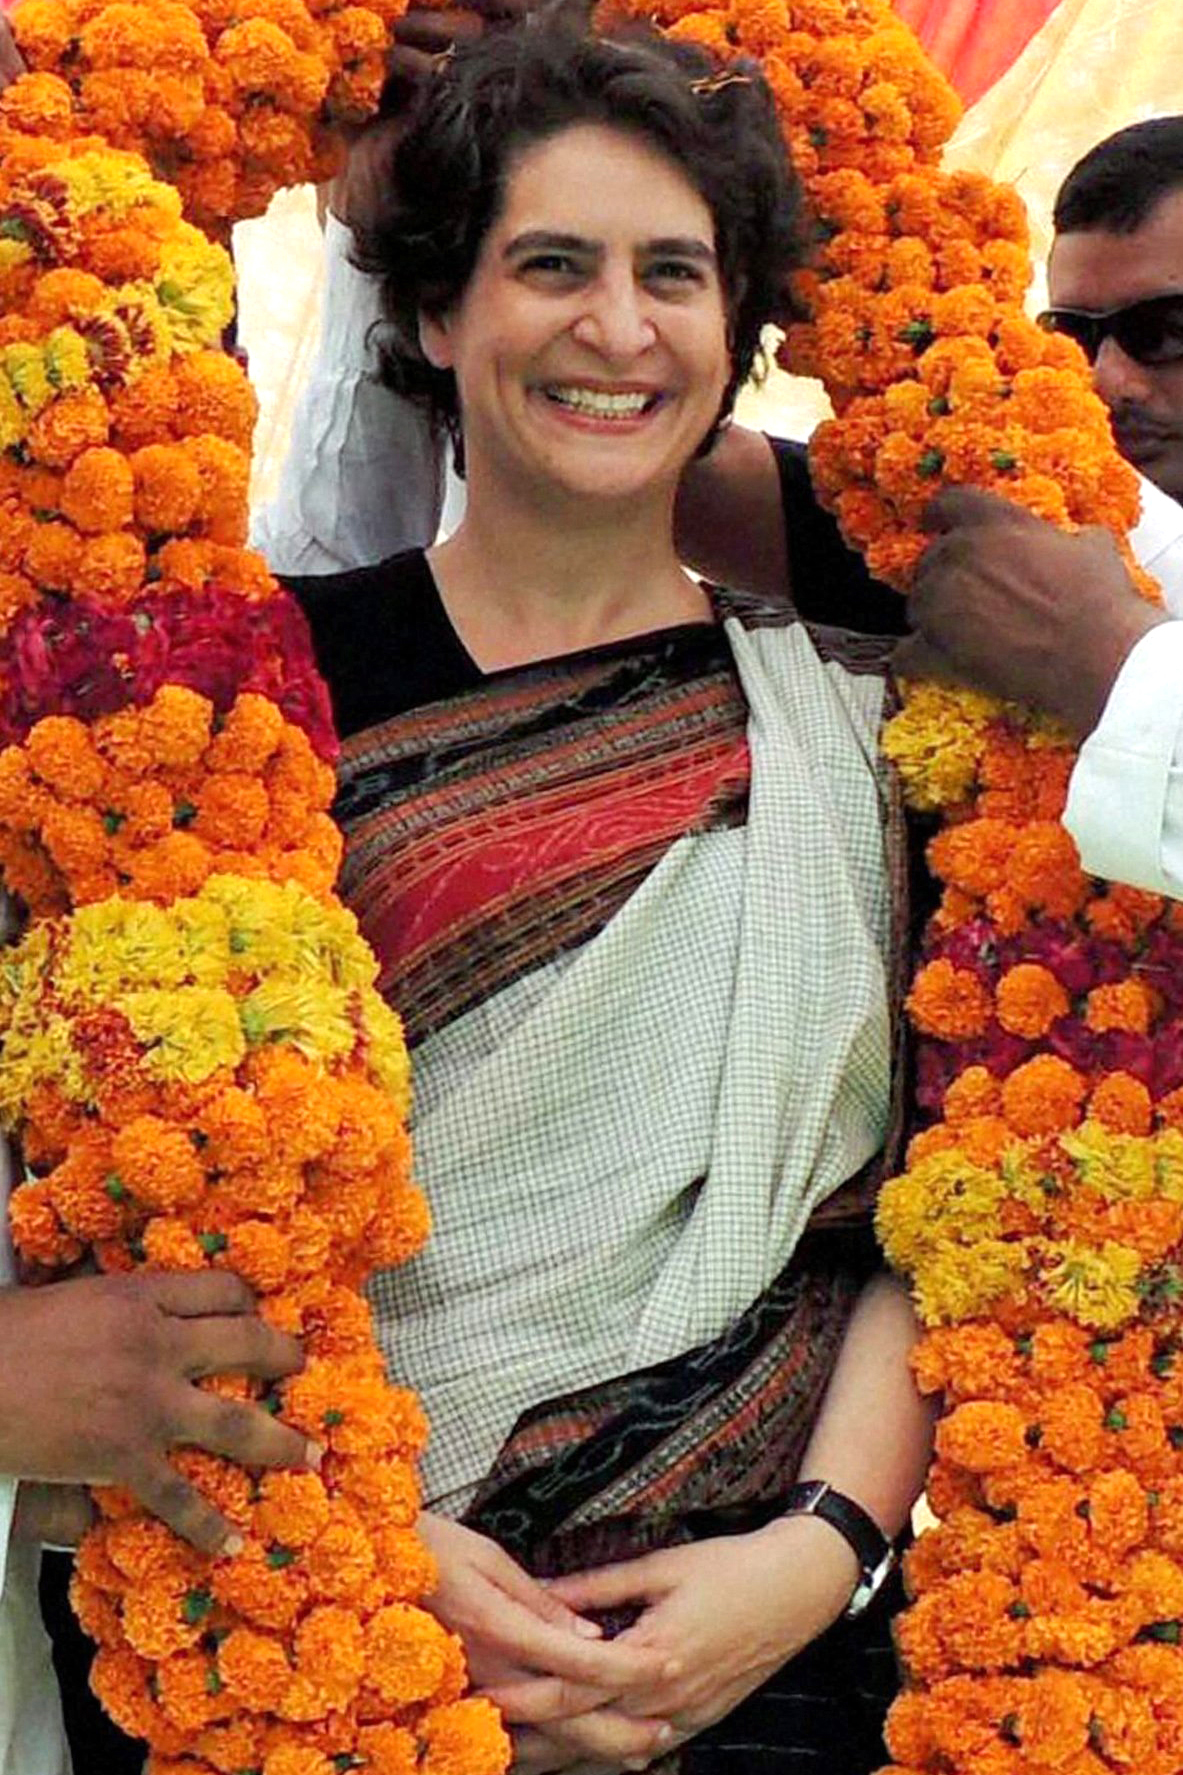 Priyanka Vadra, daughter of Congress party president Sonia Gandhi, receives a giant garland during an election campaign in her motherís constituency of Rae Bareli, India, on April 22, 2014.